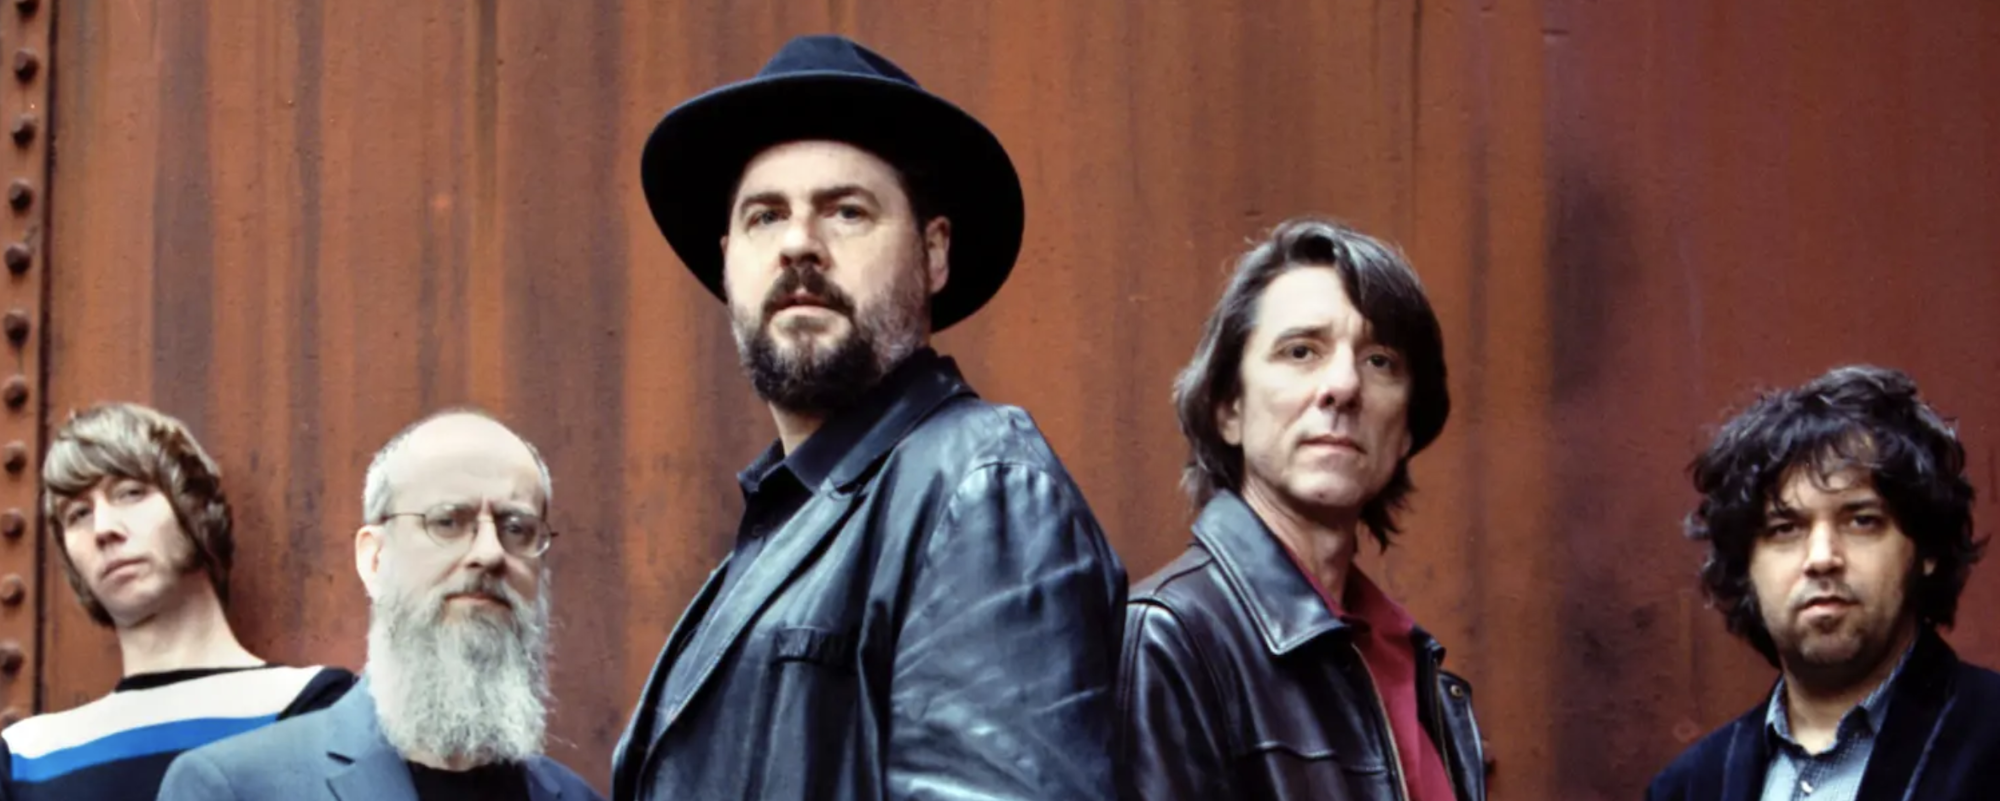 Drive-By Truckers Express “Some Really Pissed Off Feelings” at Current COVID Situation